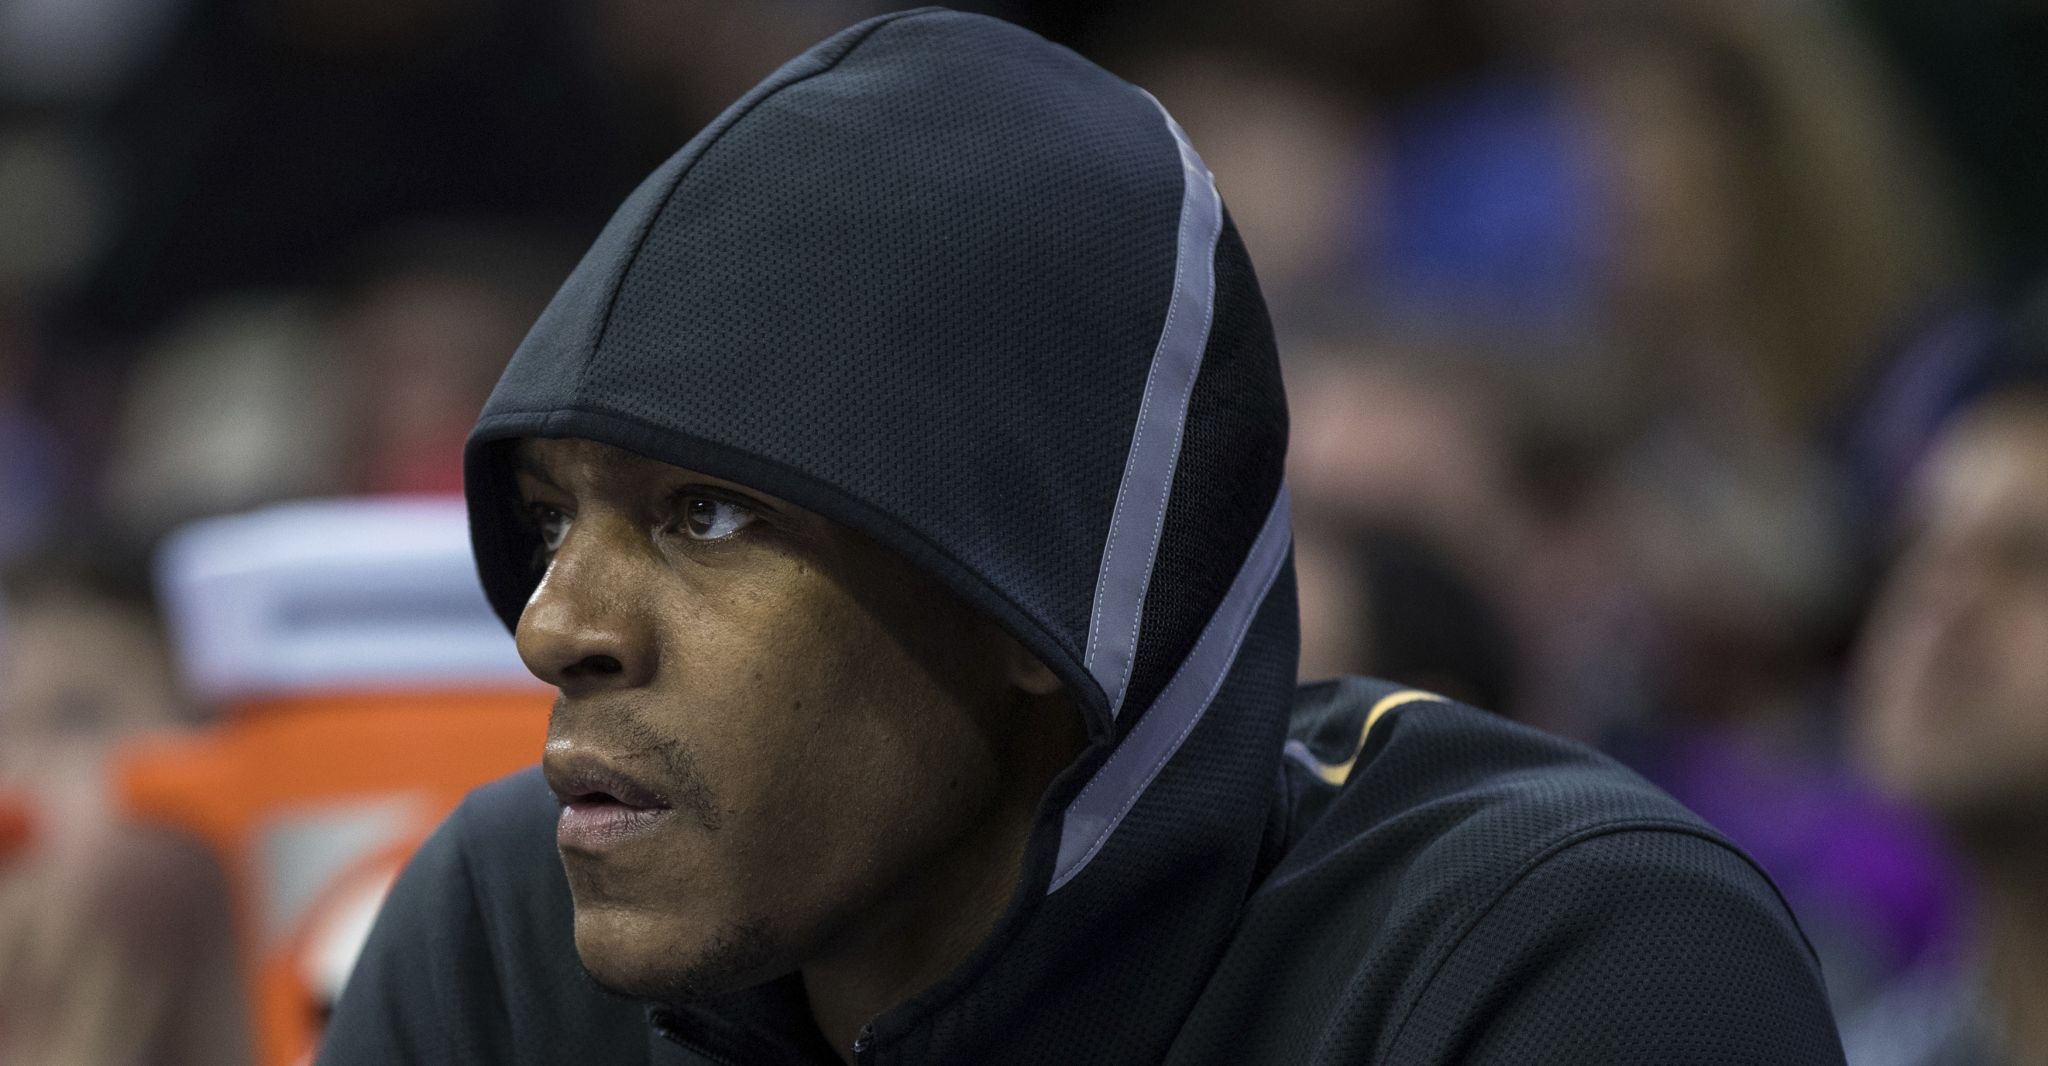 Pelicans' Rajon Rondo to sit out against Rockets.